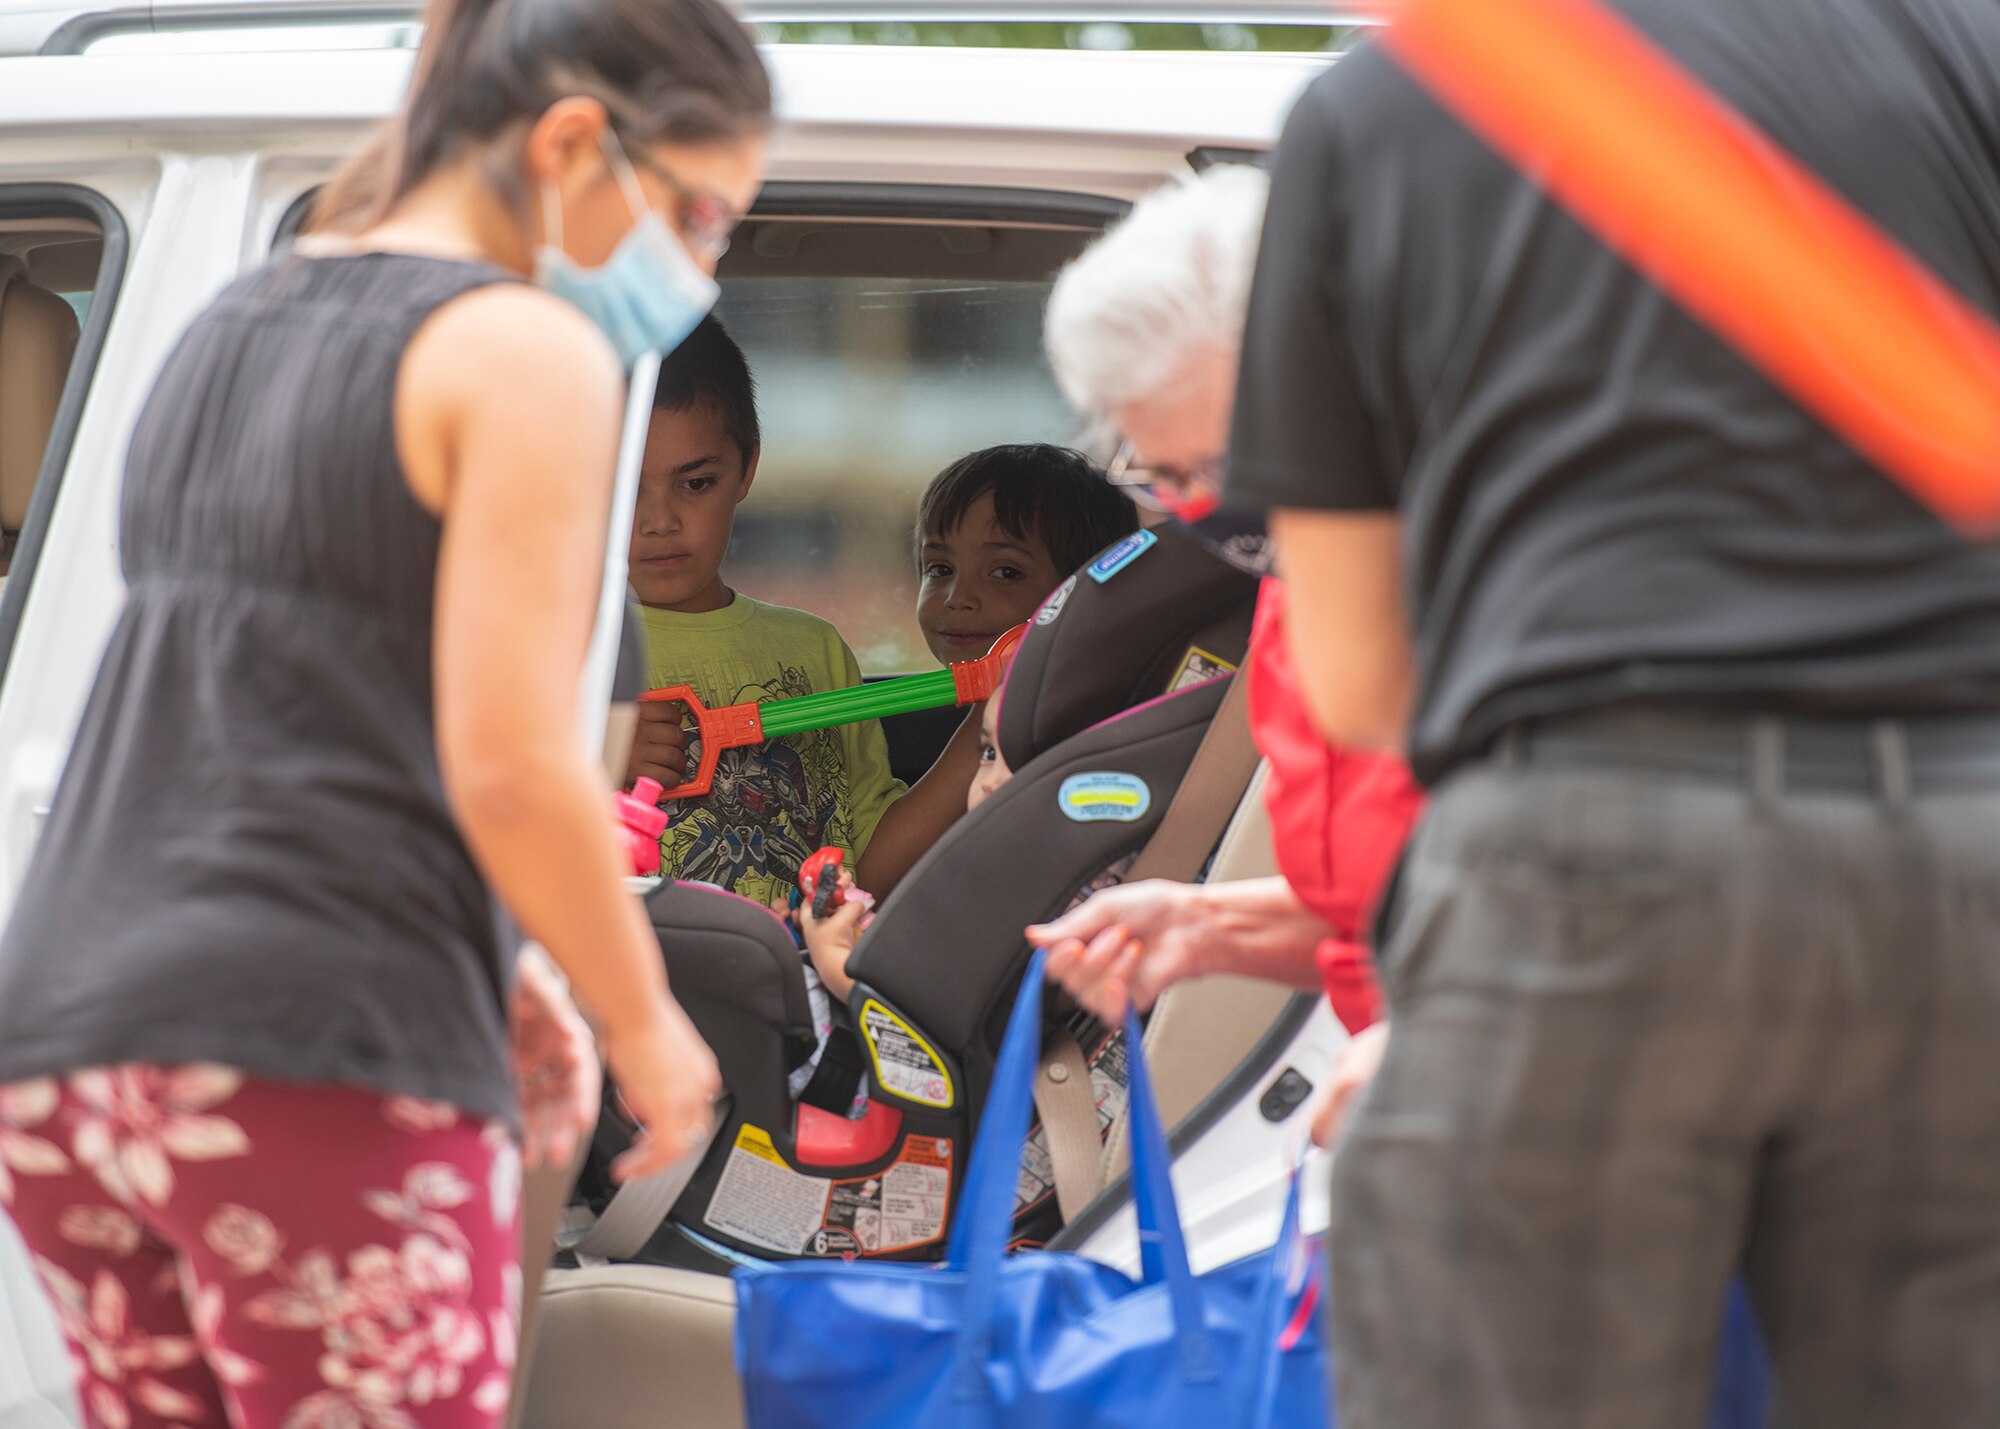 Children watch as volunteers load school supplies and toys into a car during the Back to School Bash drive-thru July 23, 2020, at the Gila Bend Arena in Glendale, Ariz.